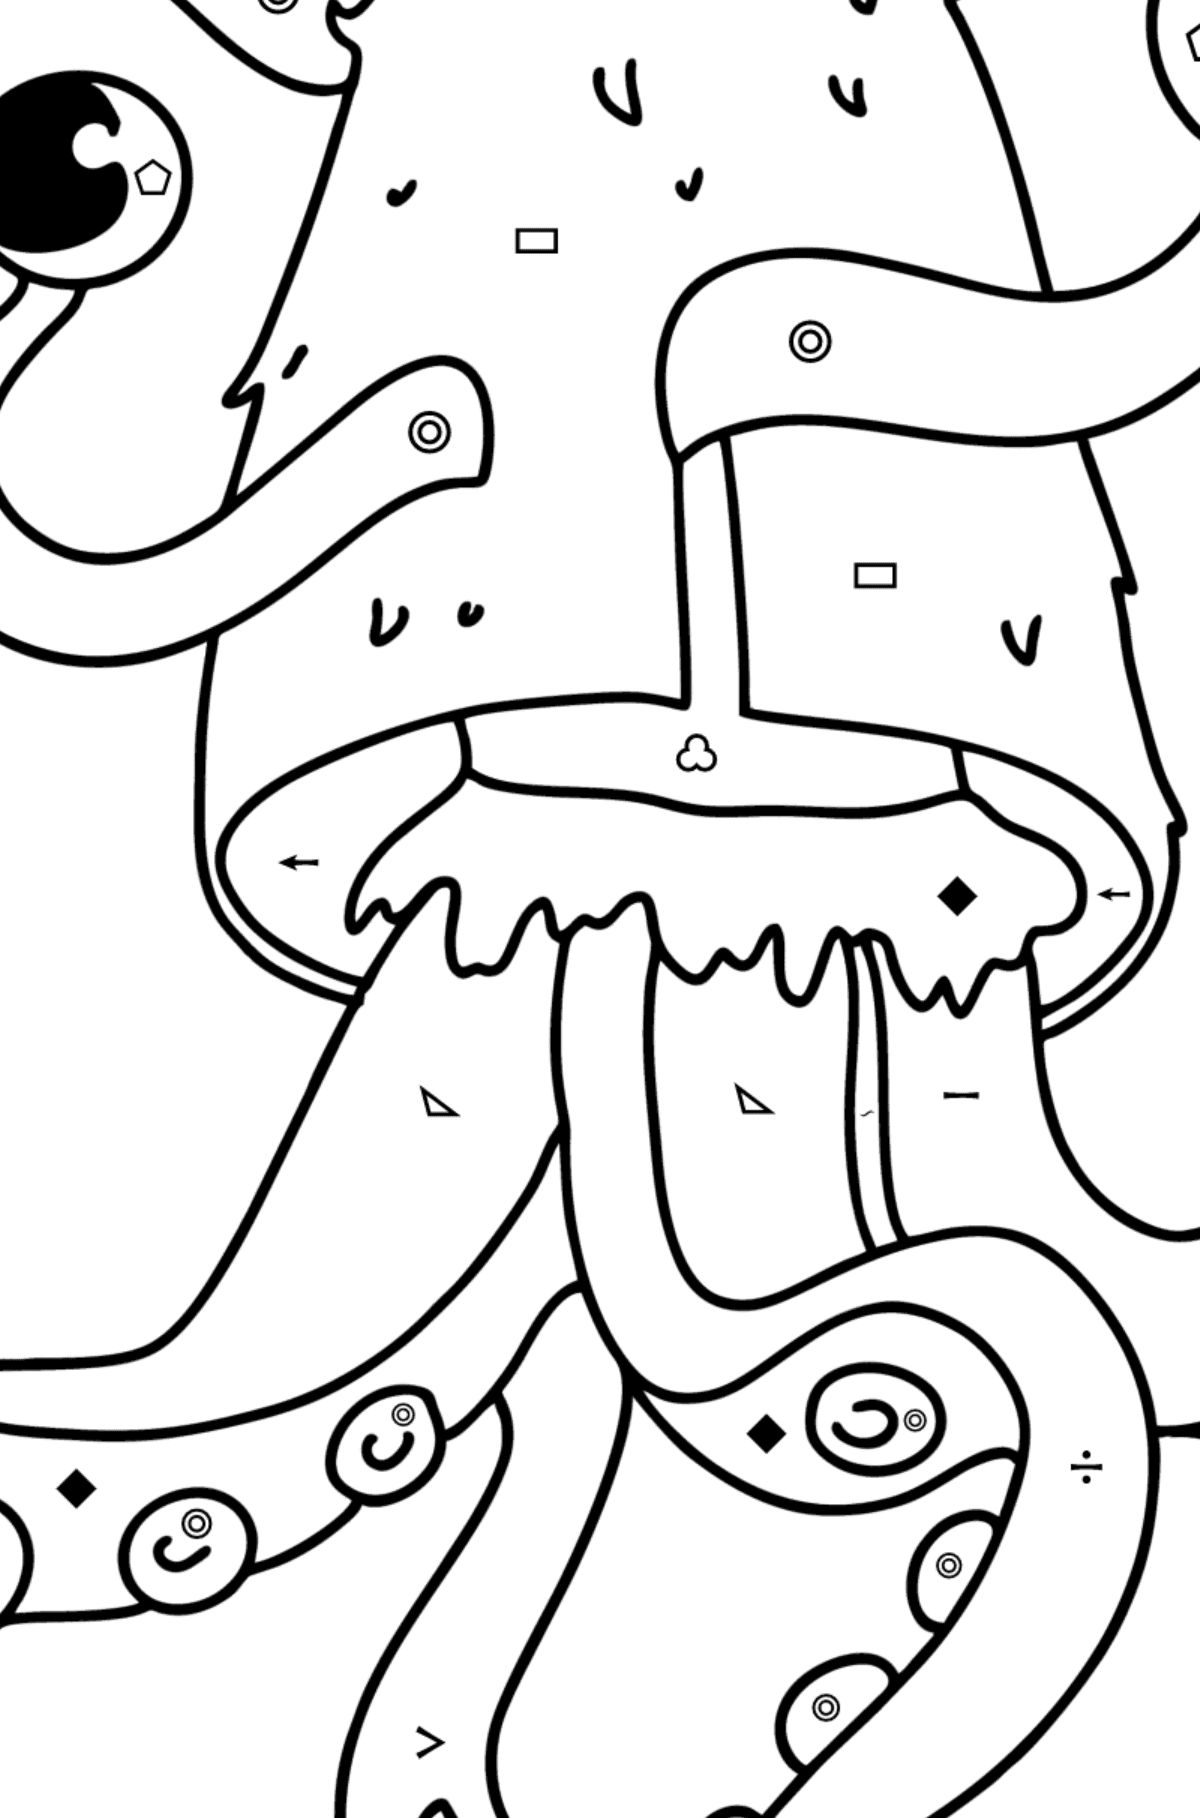 Monster Alien coloring page - Coloring by Symbols and Geometric Shapes for Kids